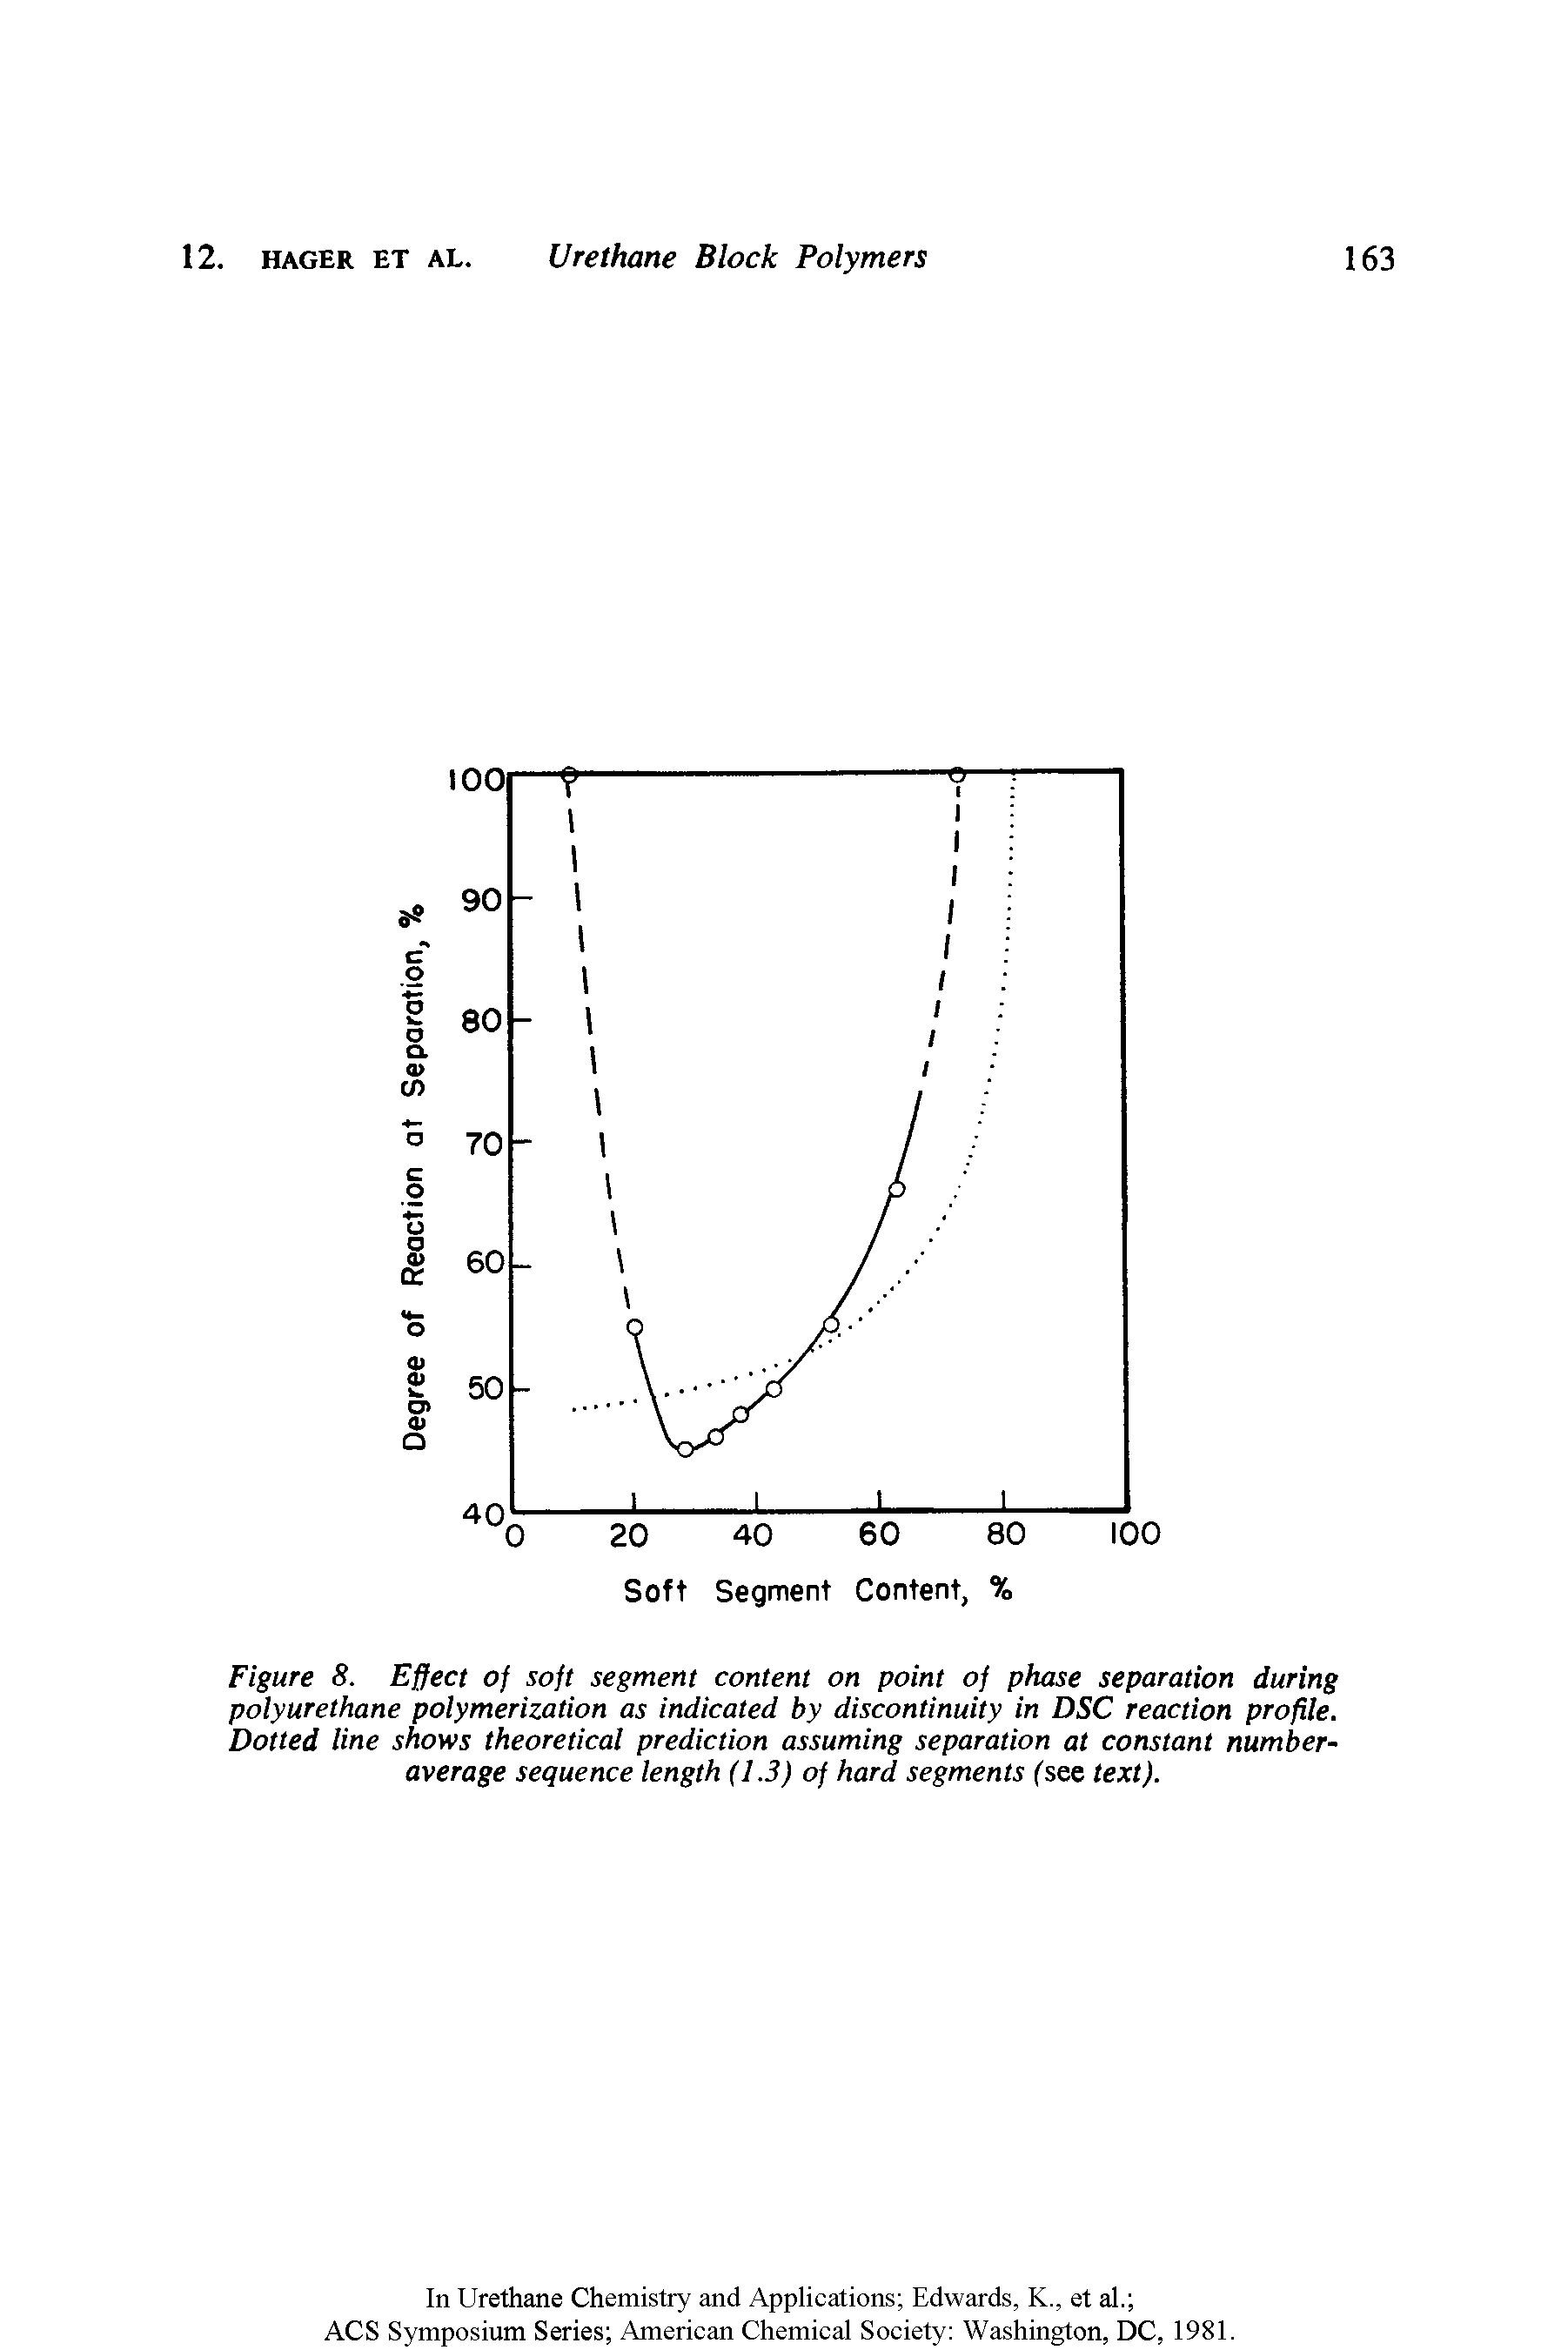 Figure 8. Effect of soft segment content on point of phase separation during polyurethane polymerization as indicated by discontinuity in DSC reaction profile. Dotted line shows theoretical prediction assuming separation at constant number-average sequence length (1.3) of hard segments ("see text).